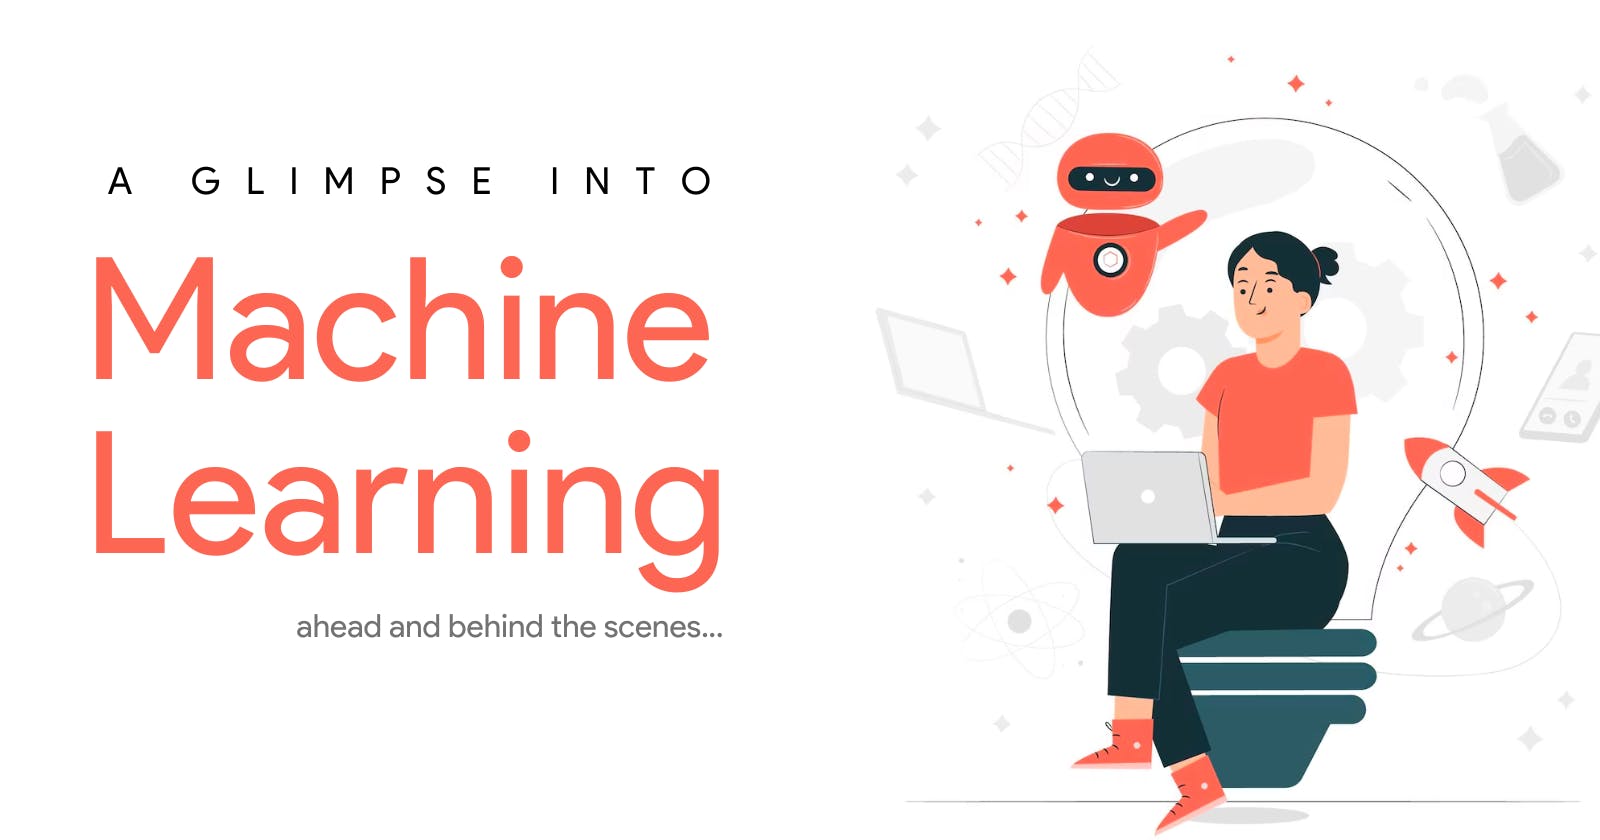 A Glimpse into Machine Learning